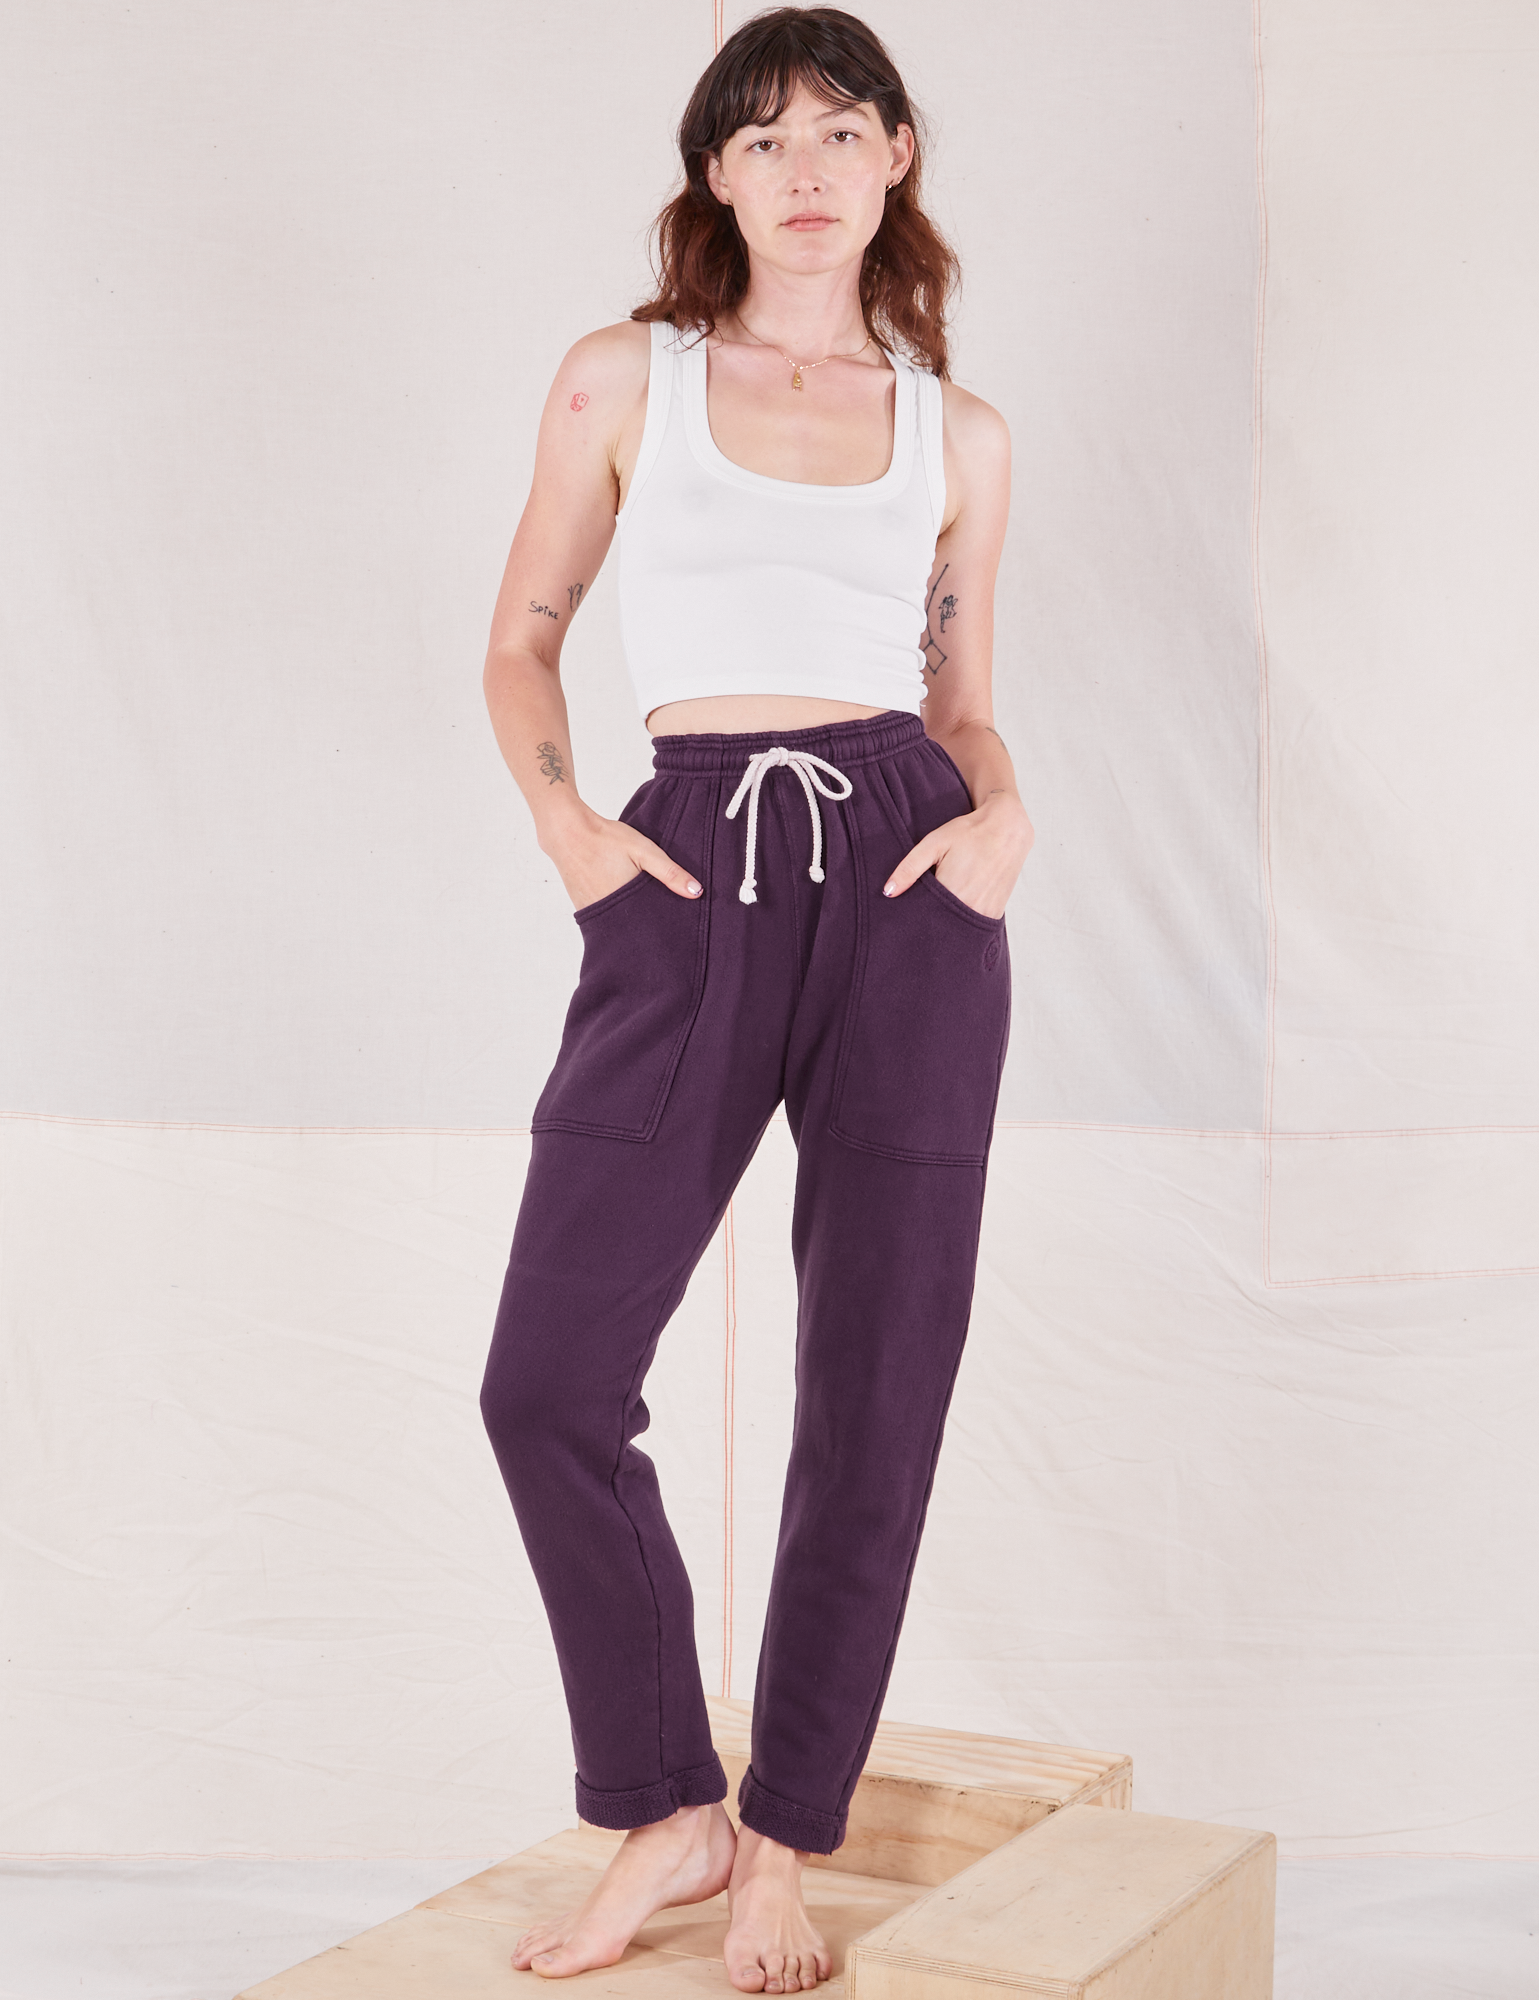 Alex is 5&#39;8&quot; and wearing P Rolled Cuff Sweat Pants in Nebula Purple paired with vintage off-white Cropped Tank